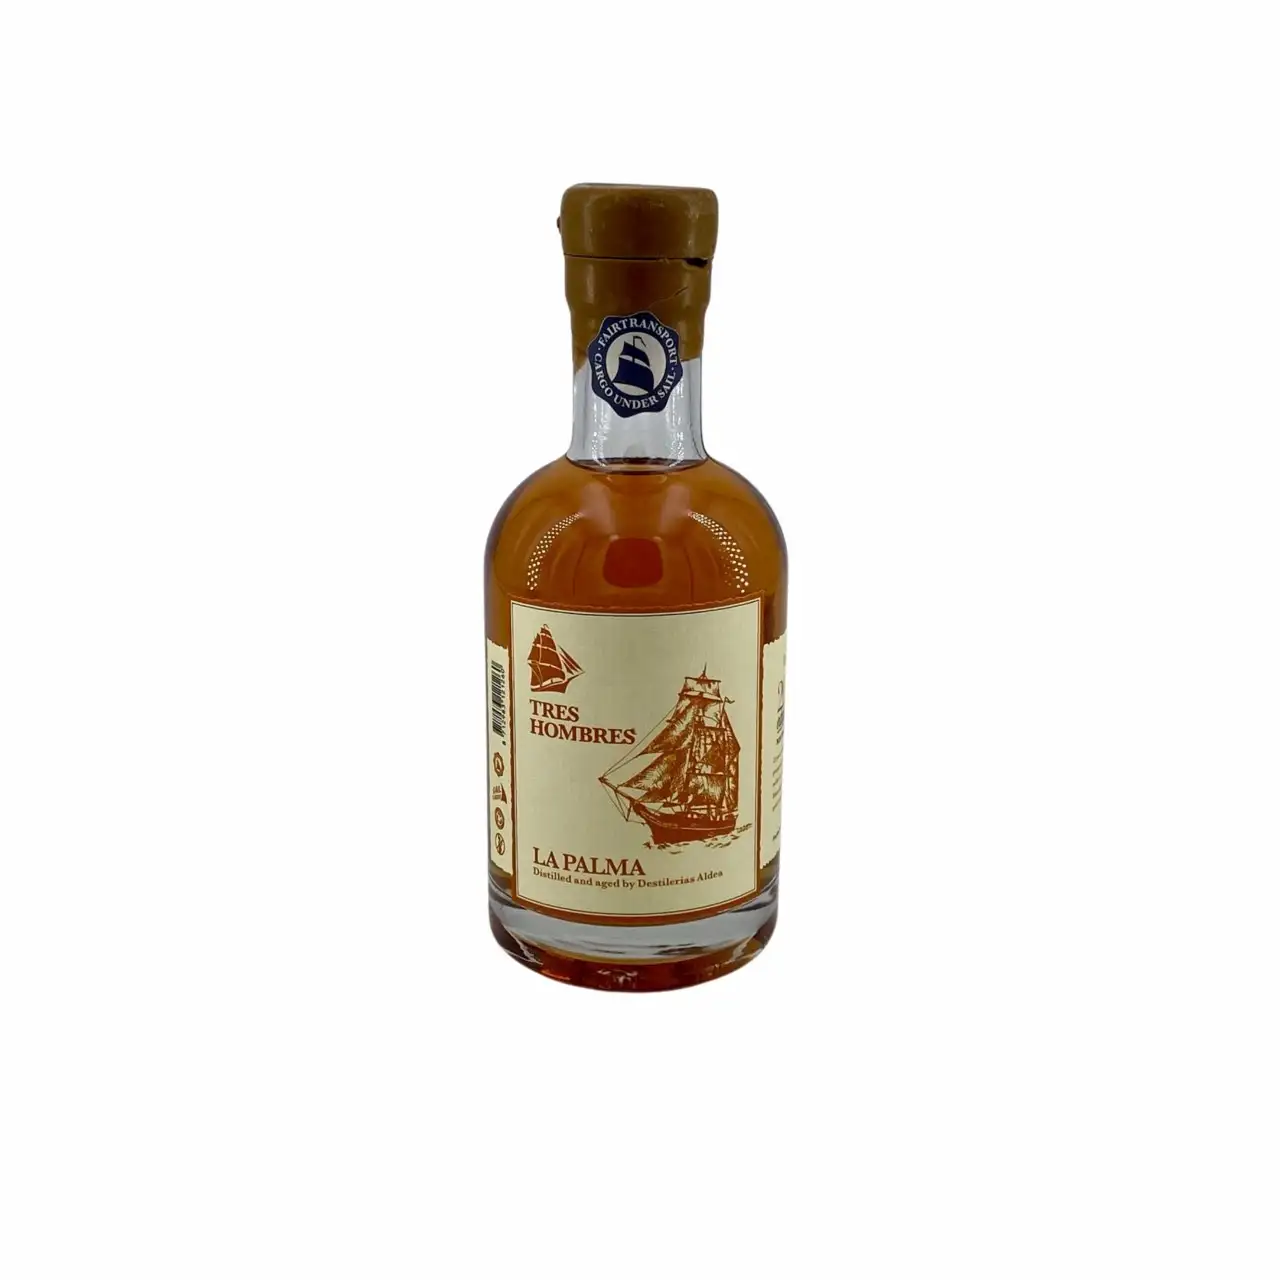 Image of the front of the bottle of the rum Ed. 37 La Palma Quince